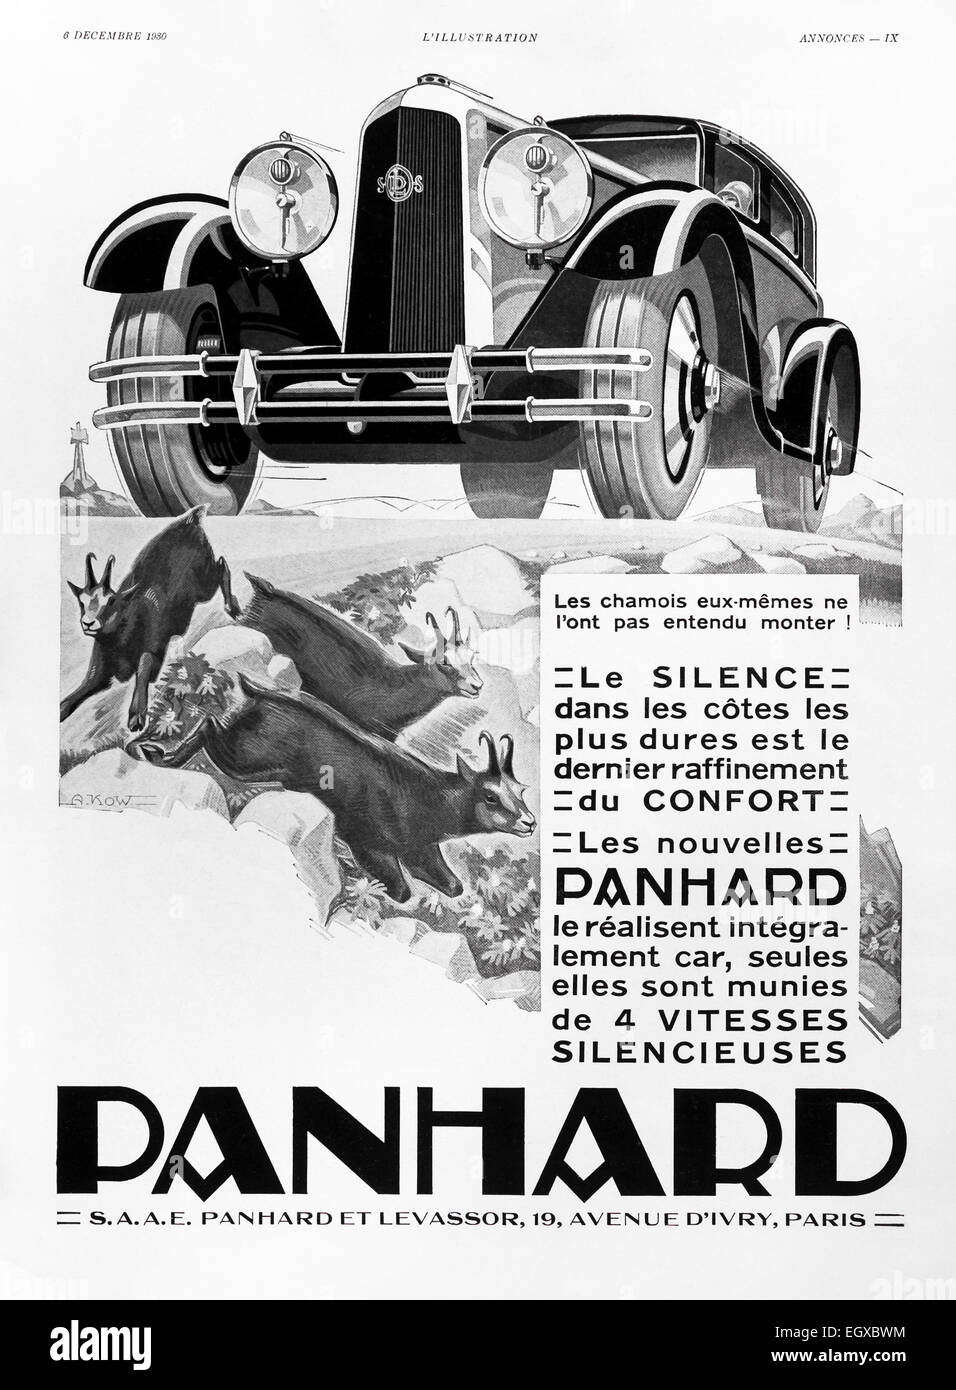 1930 advert for “Panhard” car from French “L’Illustration” magazine. Stock Photo